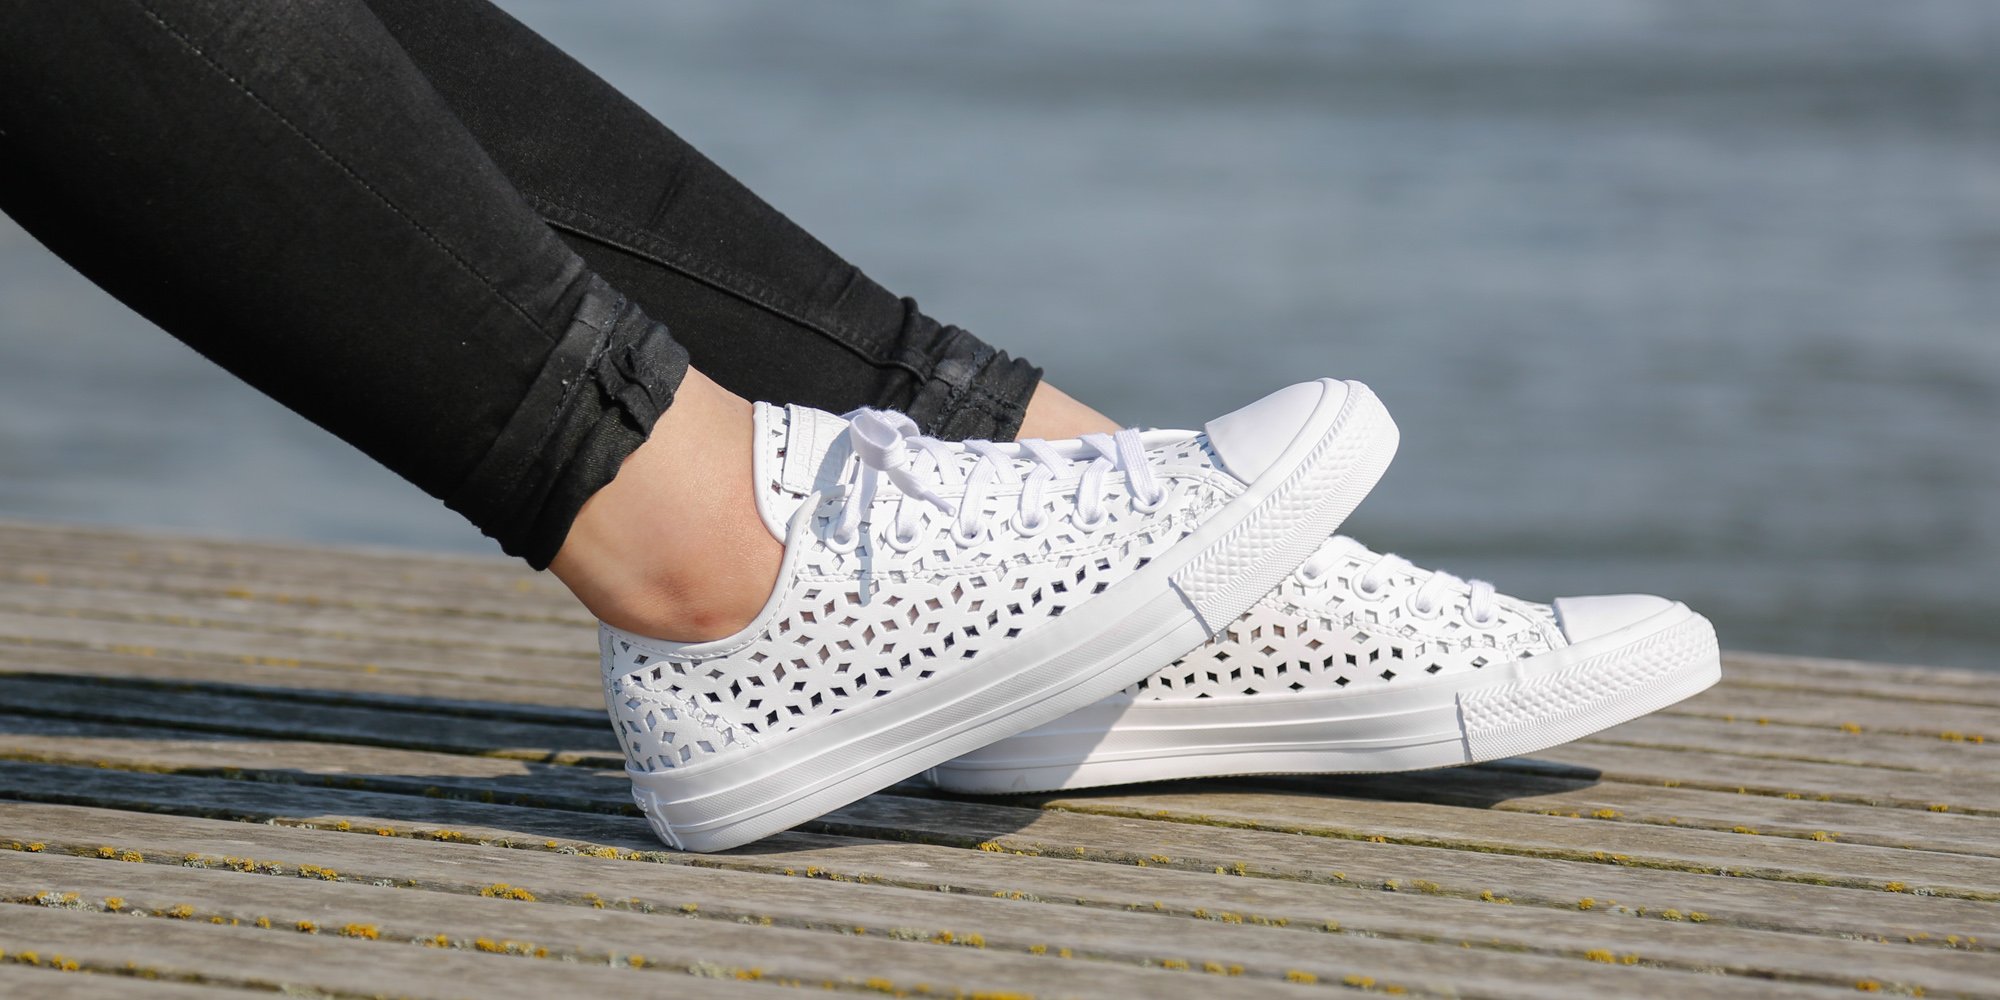 Foot Locker EU on X: "Keep it breezy with the women's #Converse Chuck  Taylor Perforated Ox & Hi Mono https://t.co/tGn2czV92T  https://t.co/pci0UpEBxO" / X